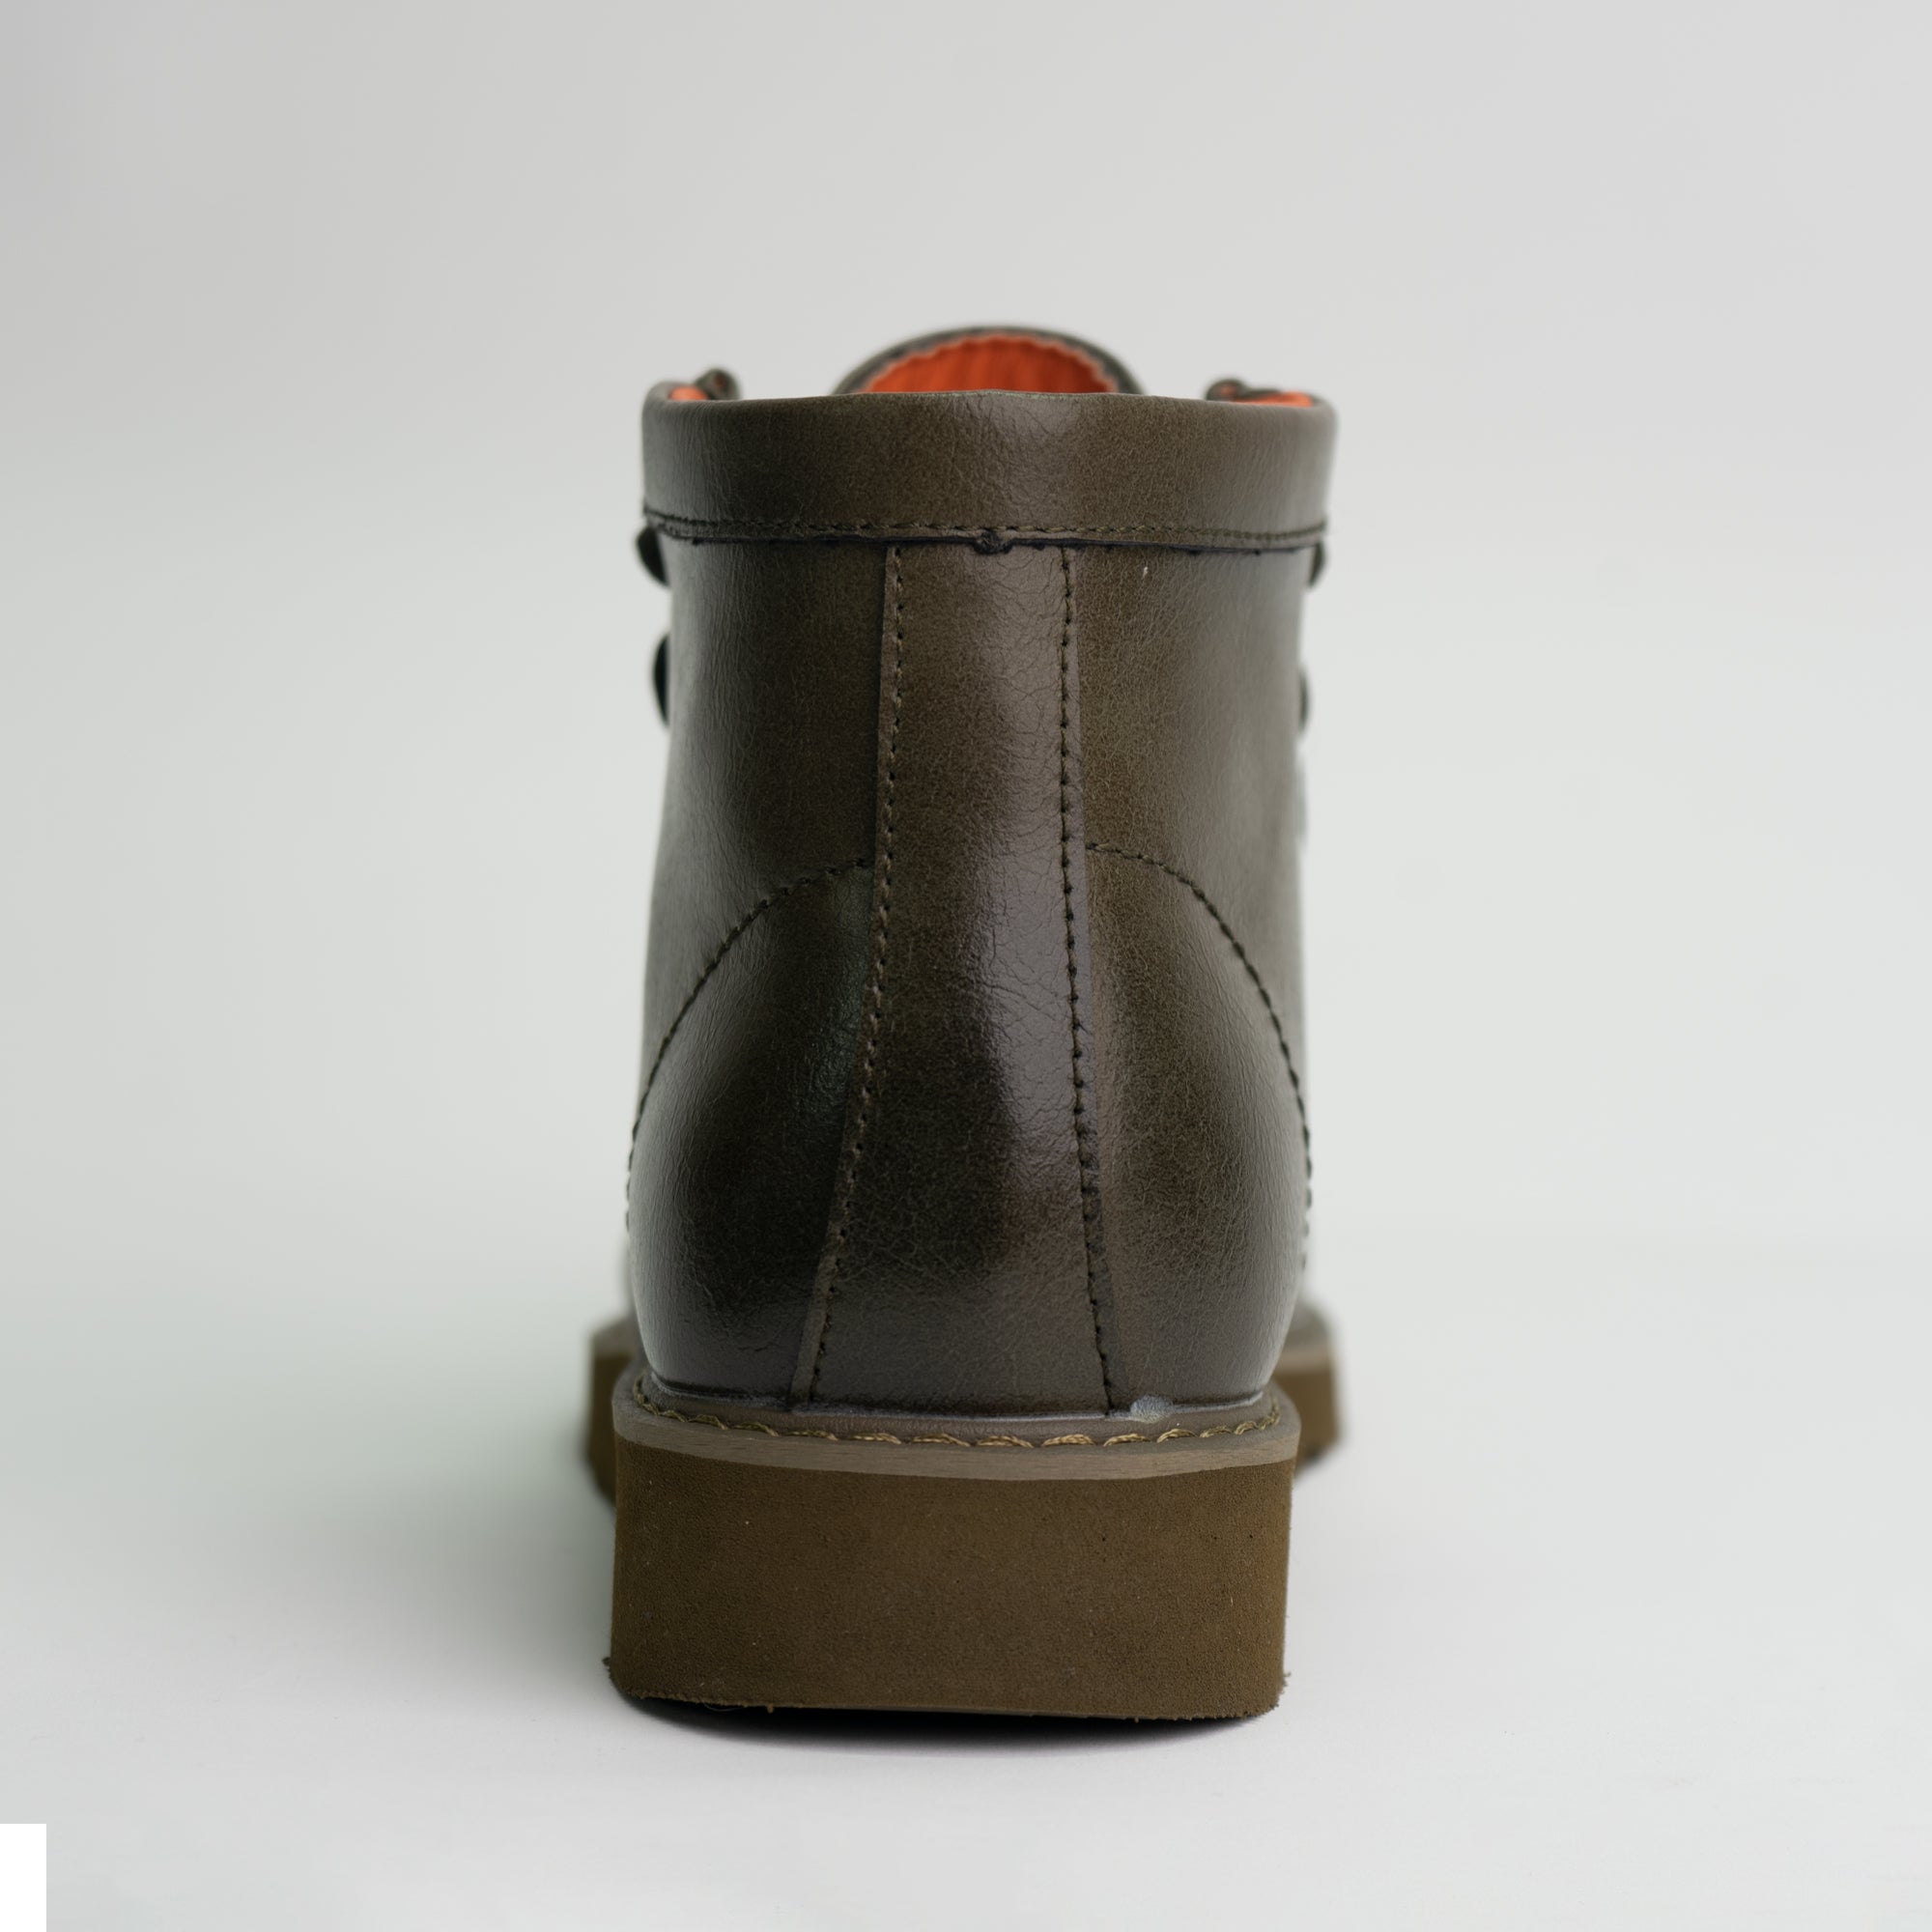 The Mojave Leather Olive